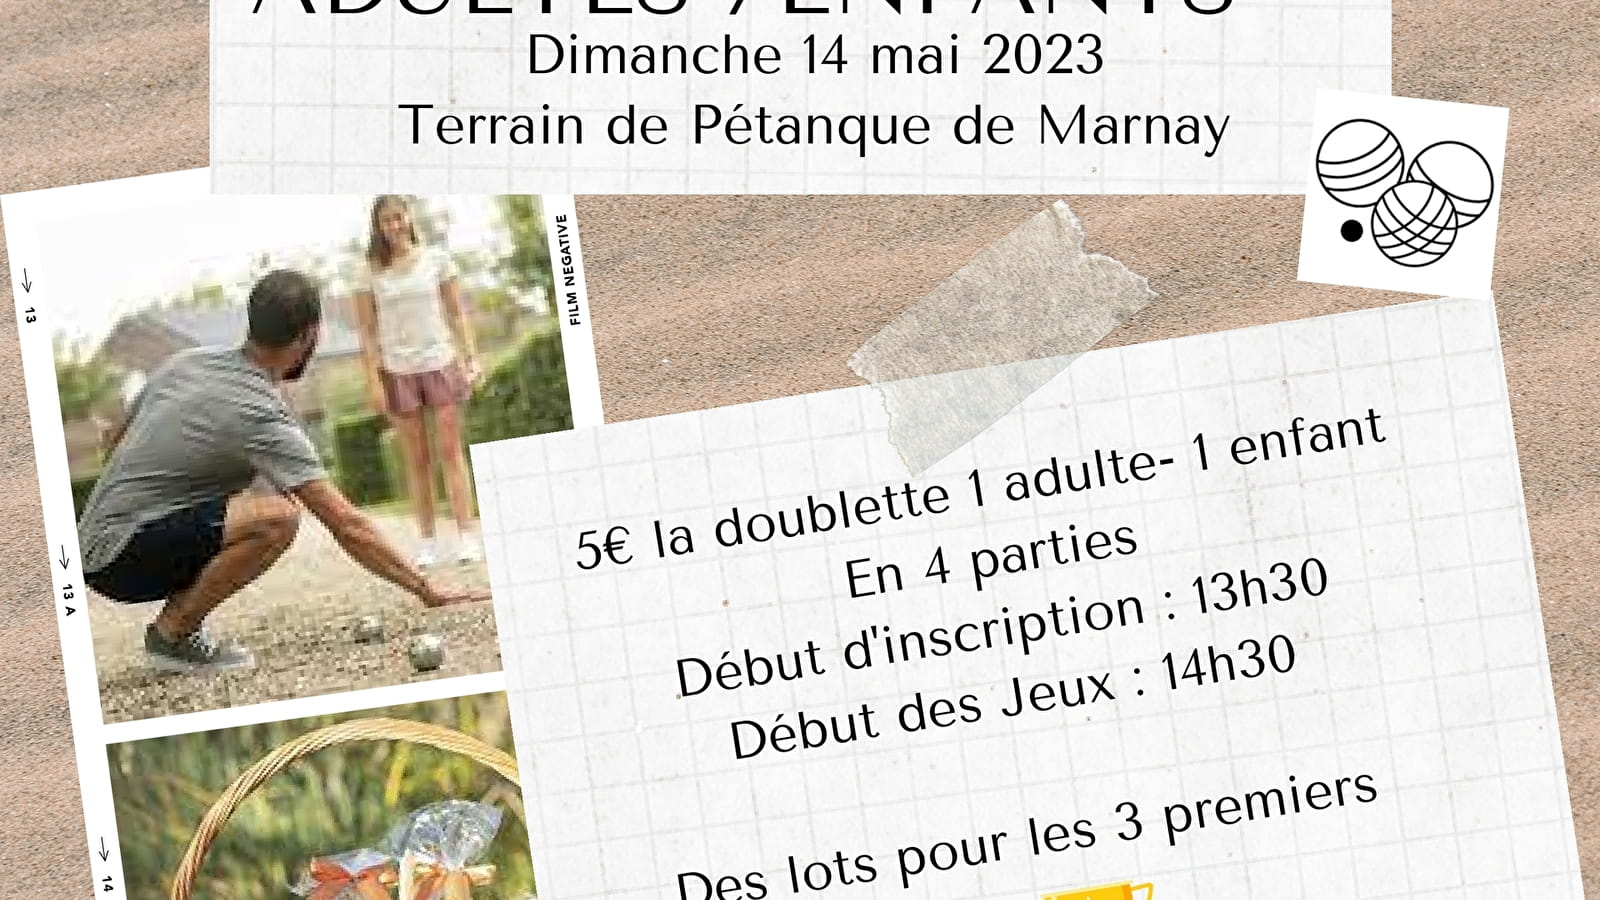 Petanque competition for adults and children 